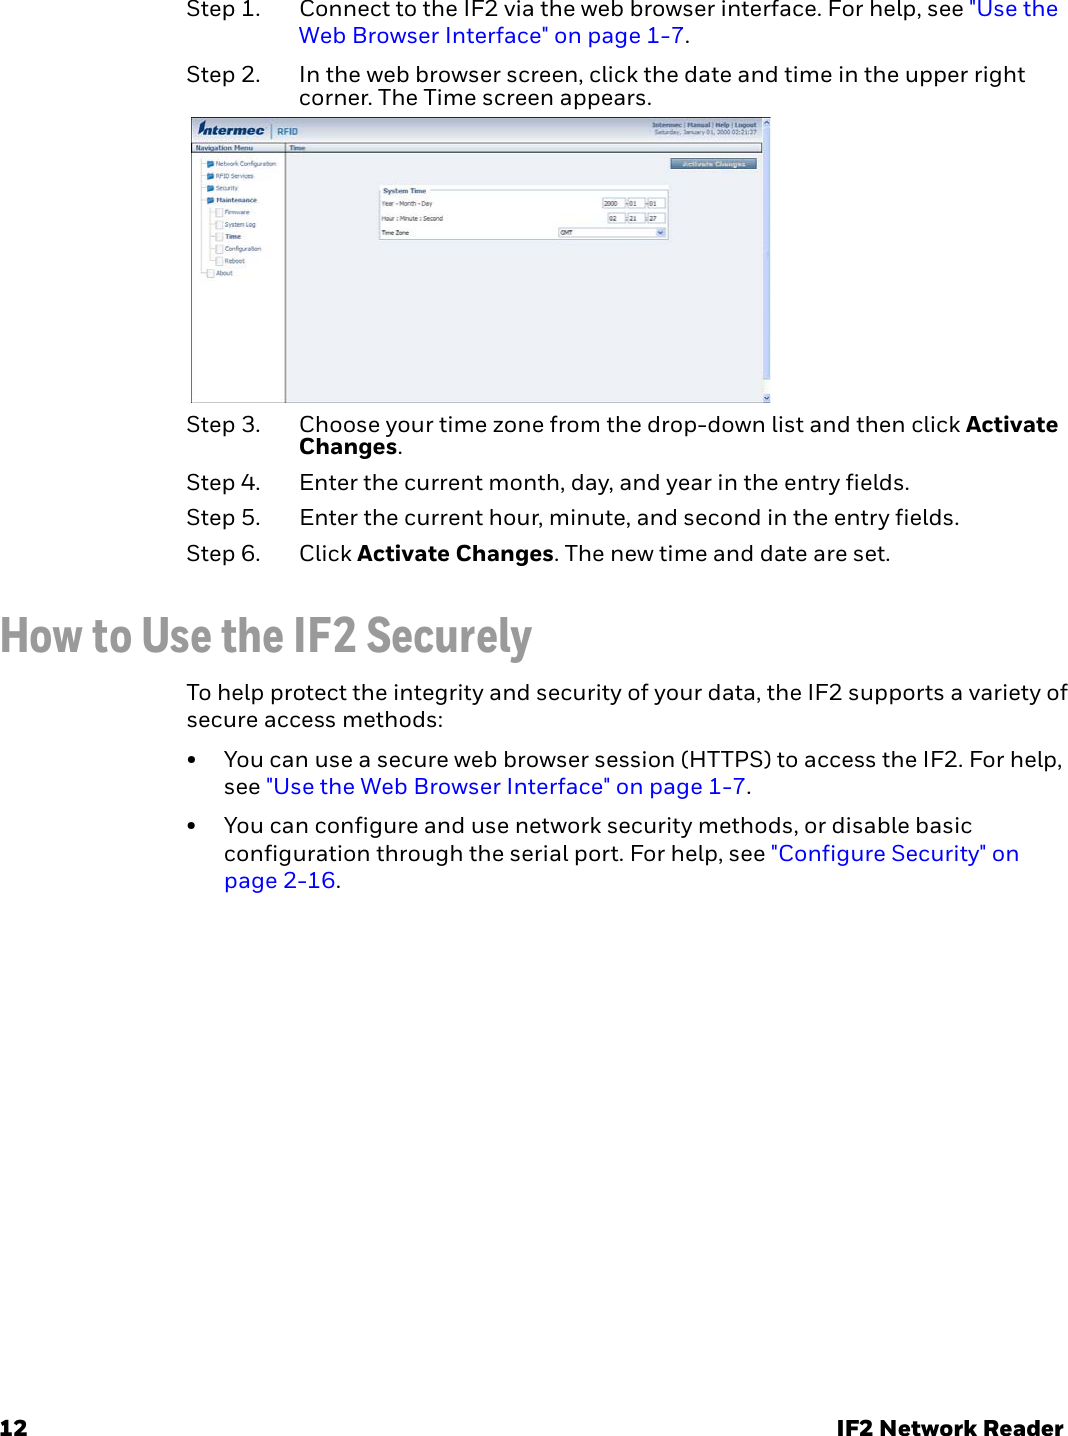 12 IF2 Network ReaderStep 1. Connect to the IF2 via the web browser interface. For help, see &quot;Use the Web Browser Interface&quot; on page 1-7.Step 2. In the web browser screen, click the date and time in the upper right corner. The Time screen appears.Step 3. Choose your time zone from the drop-down list and then click Activate Changes.Step 4. Enter the current month, day, and year in the entry fields.Step 5. Enter the current hour, minute, and second in the entry fields.Step 6. Click Activate Changes. The new time and date are set.How to Use the IF2 SecurelyTo help protect the integrity and security of your data, the IF2 supports a variety of secure access methods:• You can use a secure web browser session (HTTPS) to access the IF2. For help, see &quot;Use the Web Browser Interface&quot; on page 1-7.• You can configure and use network security methods, or disable basic configuration through the serial port. For help, see &quot;Configure Security&quot; on page 2-16.